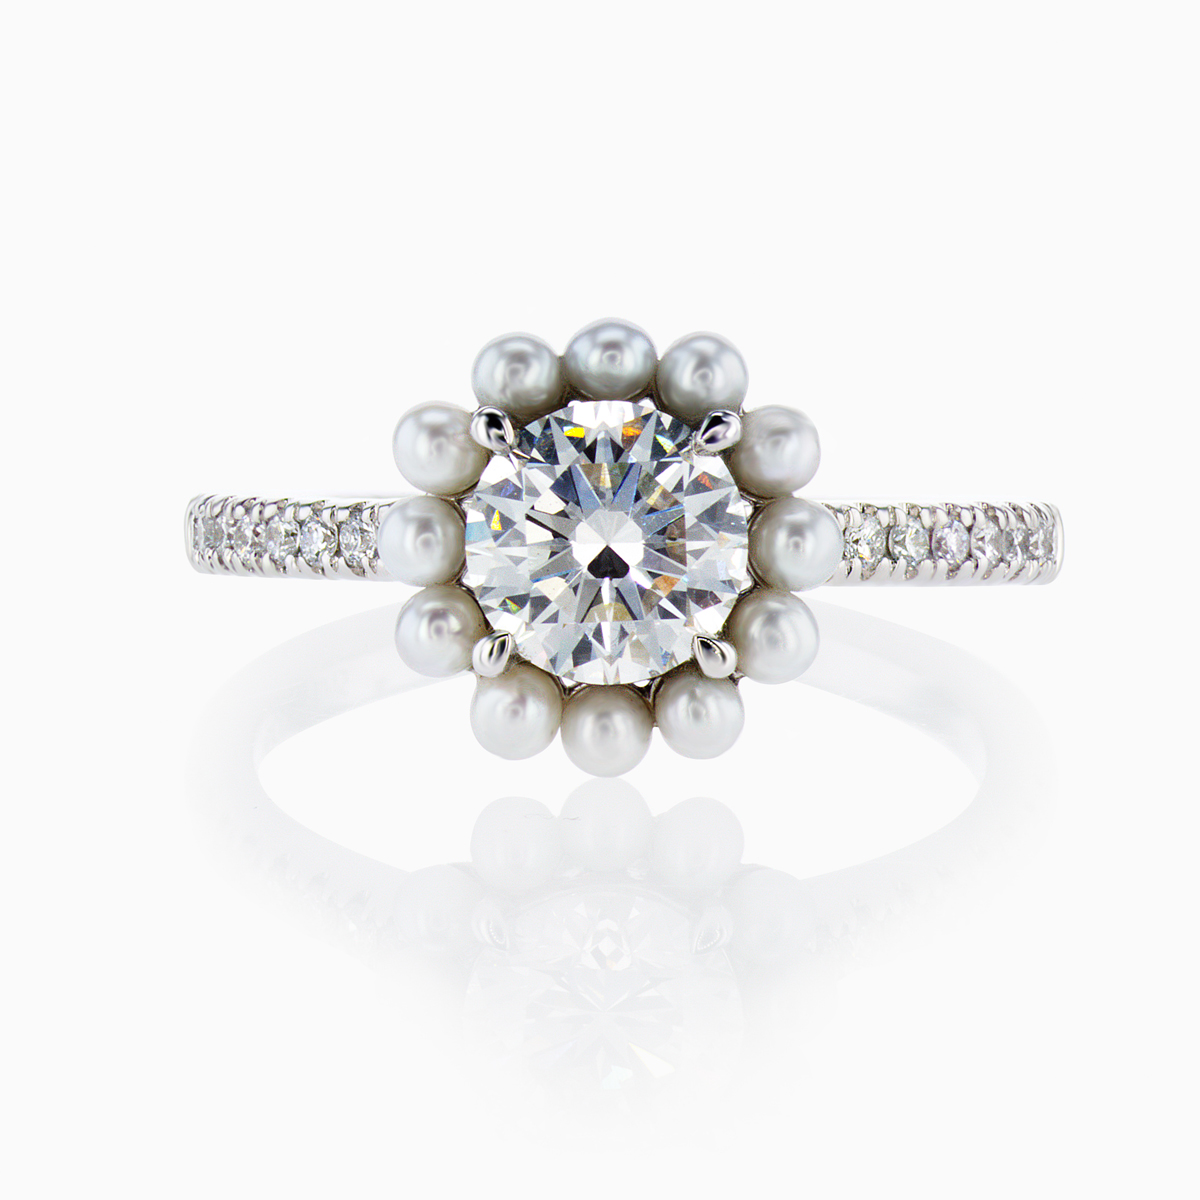 1-Carat Lab-Grown Diamond & Pearl Double Halo Ring in 18k White Gold